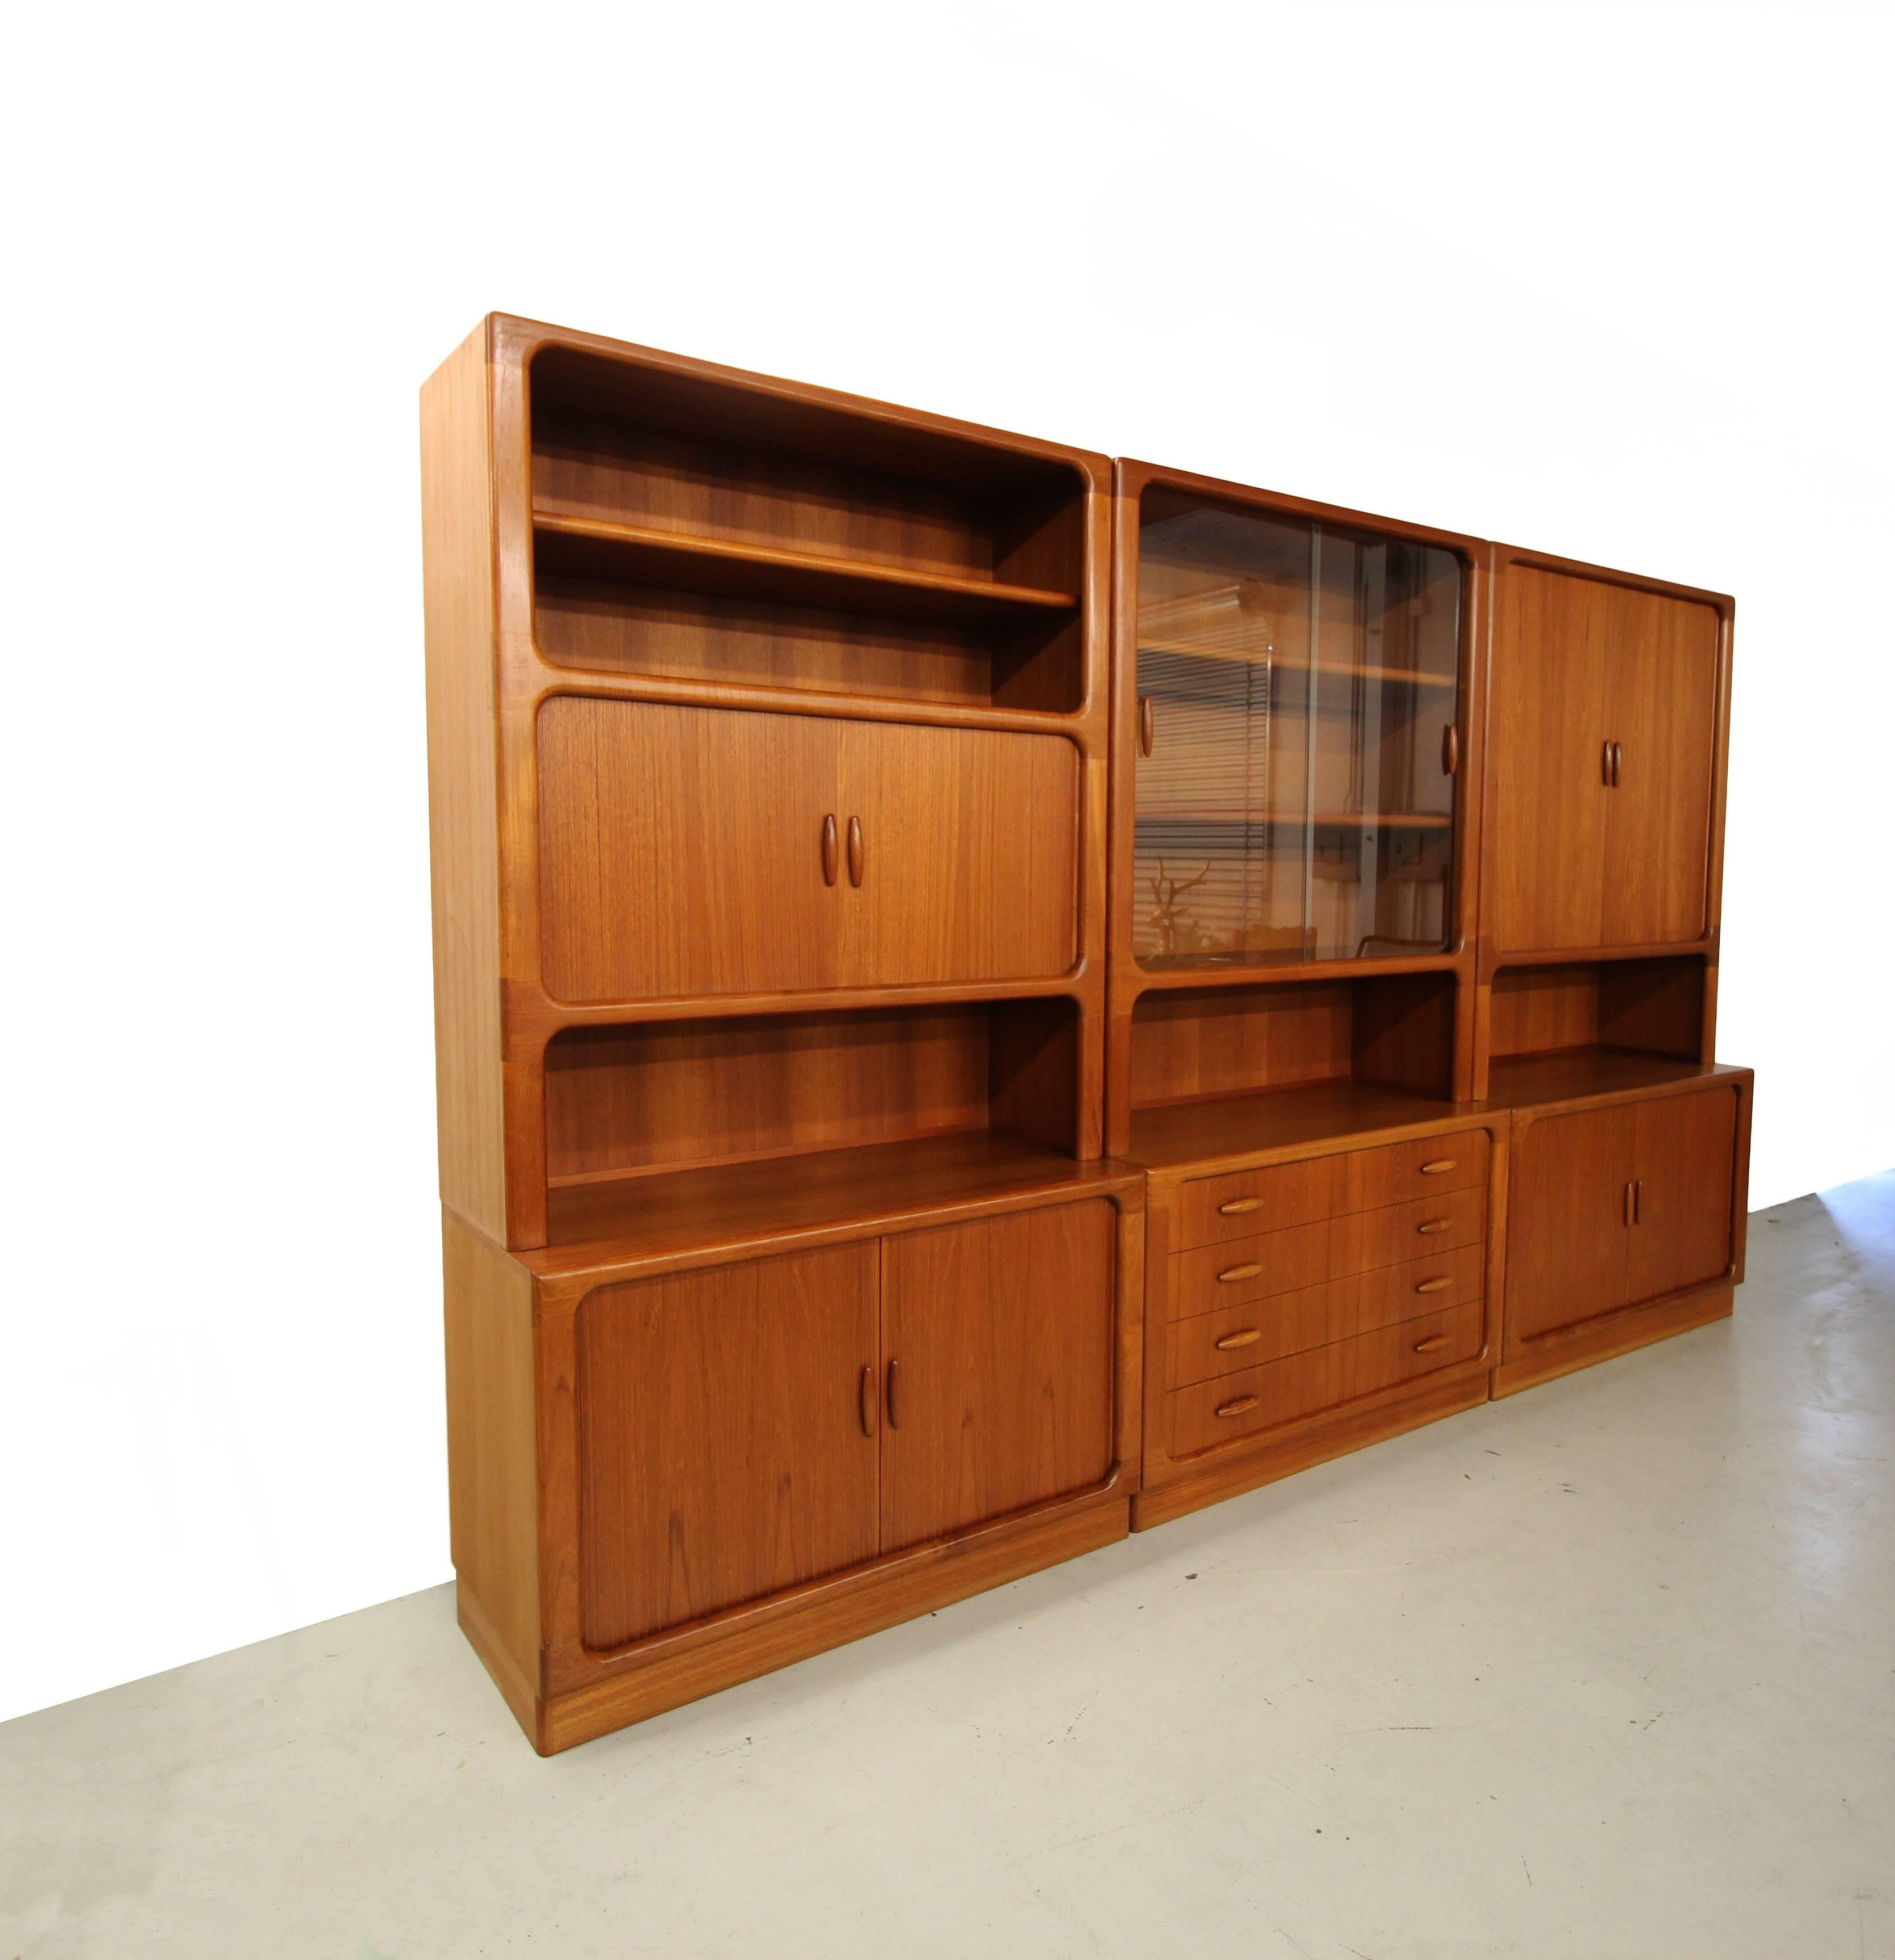 This a substantial set of 3 Danish Teak Wall Units by Dyrlund. Each wall unit is comprised of a top and a bottom piece that may be used separately or all together as shown. This is the perfect unit for someone looking for a bookcase or ample